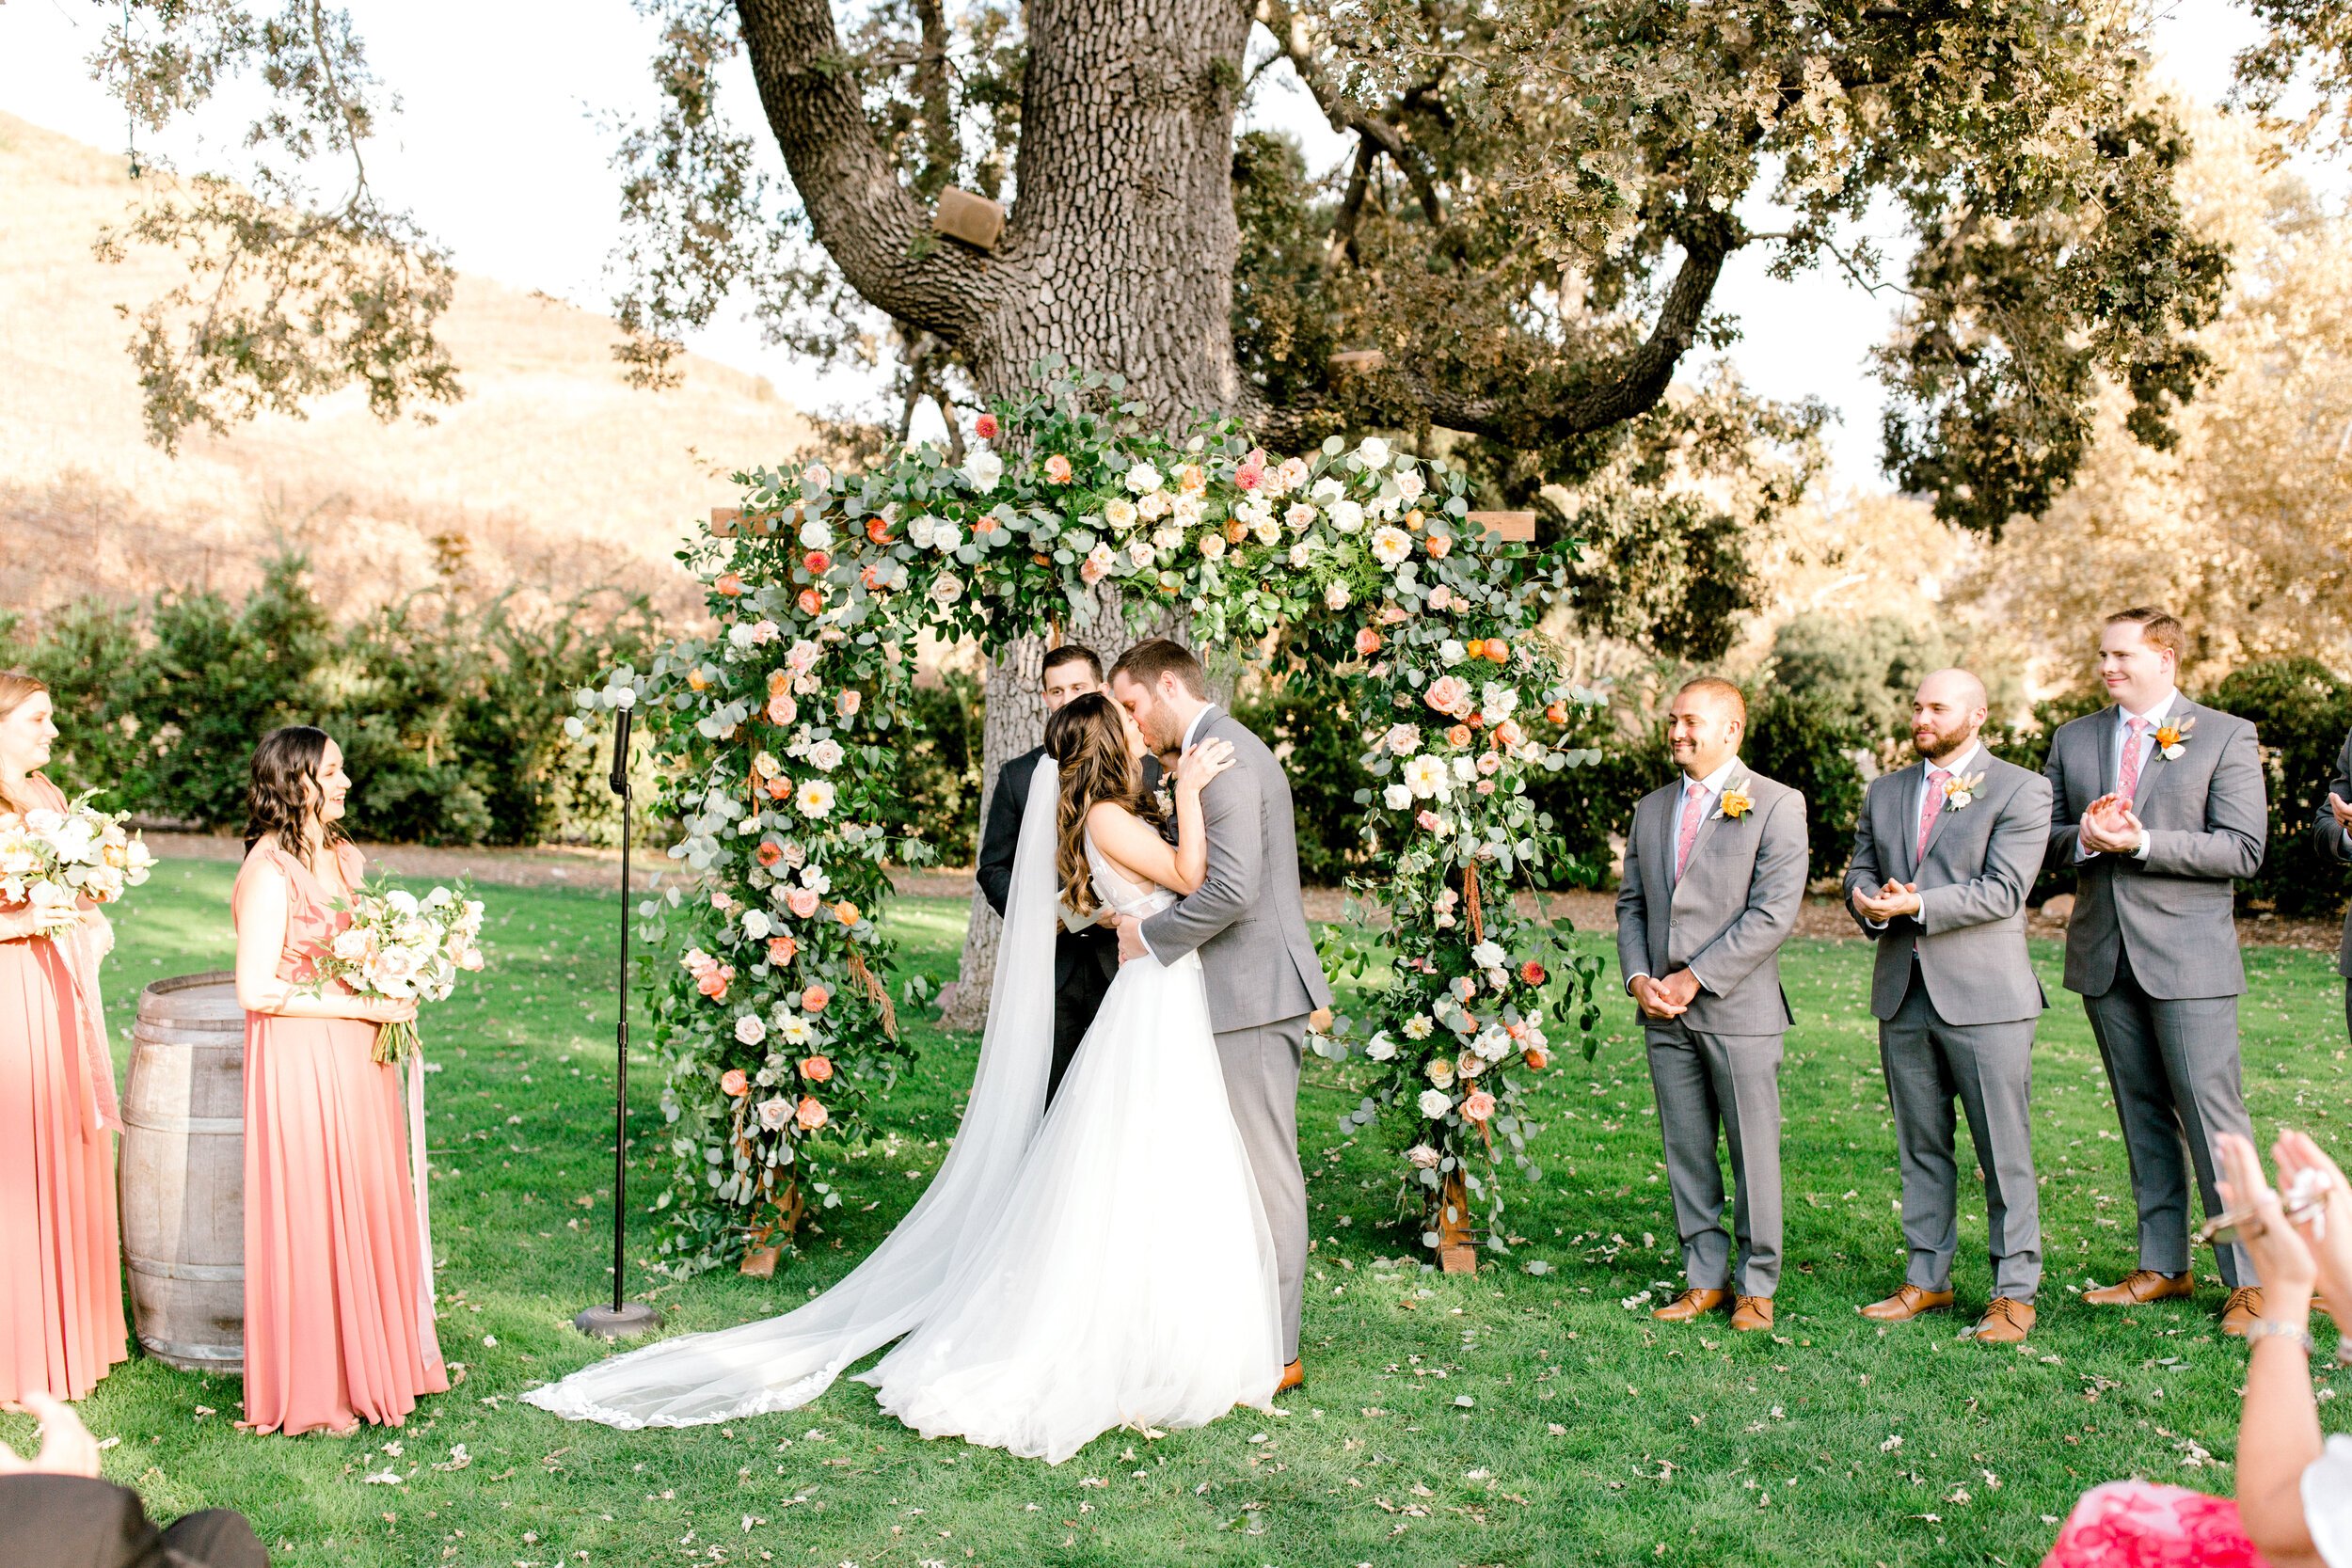 www.santabarbarawedding.com | Events by Fran | Brooke Borough Photography | Triunfo Creek Vineyards | Velvet Blooms | A Rental Connection | Bouquet Sound | Lili Bridals | Bride and Groom First Kiss